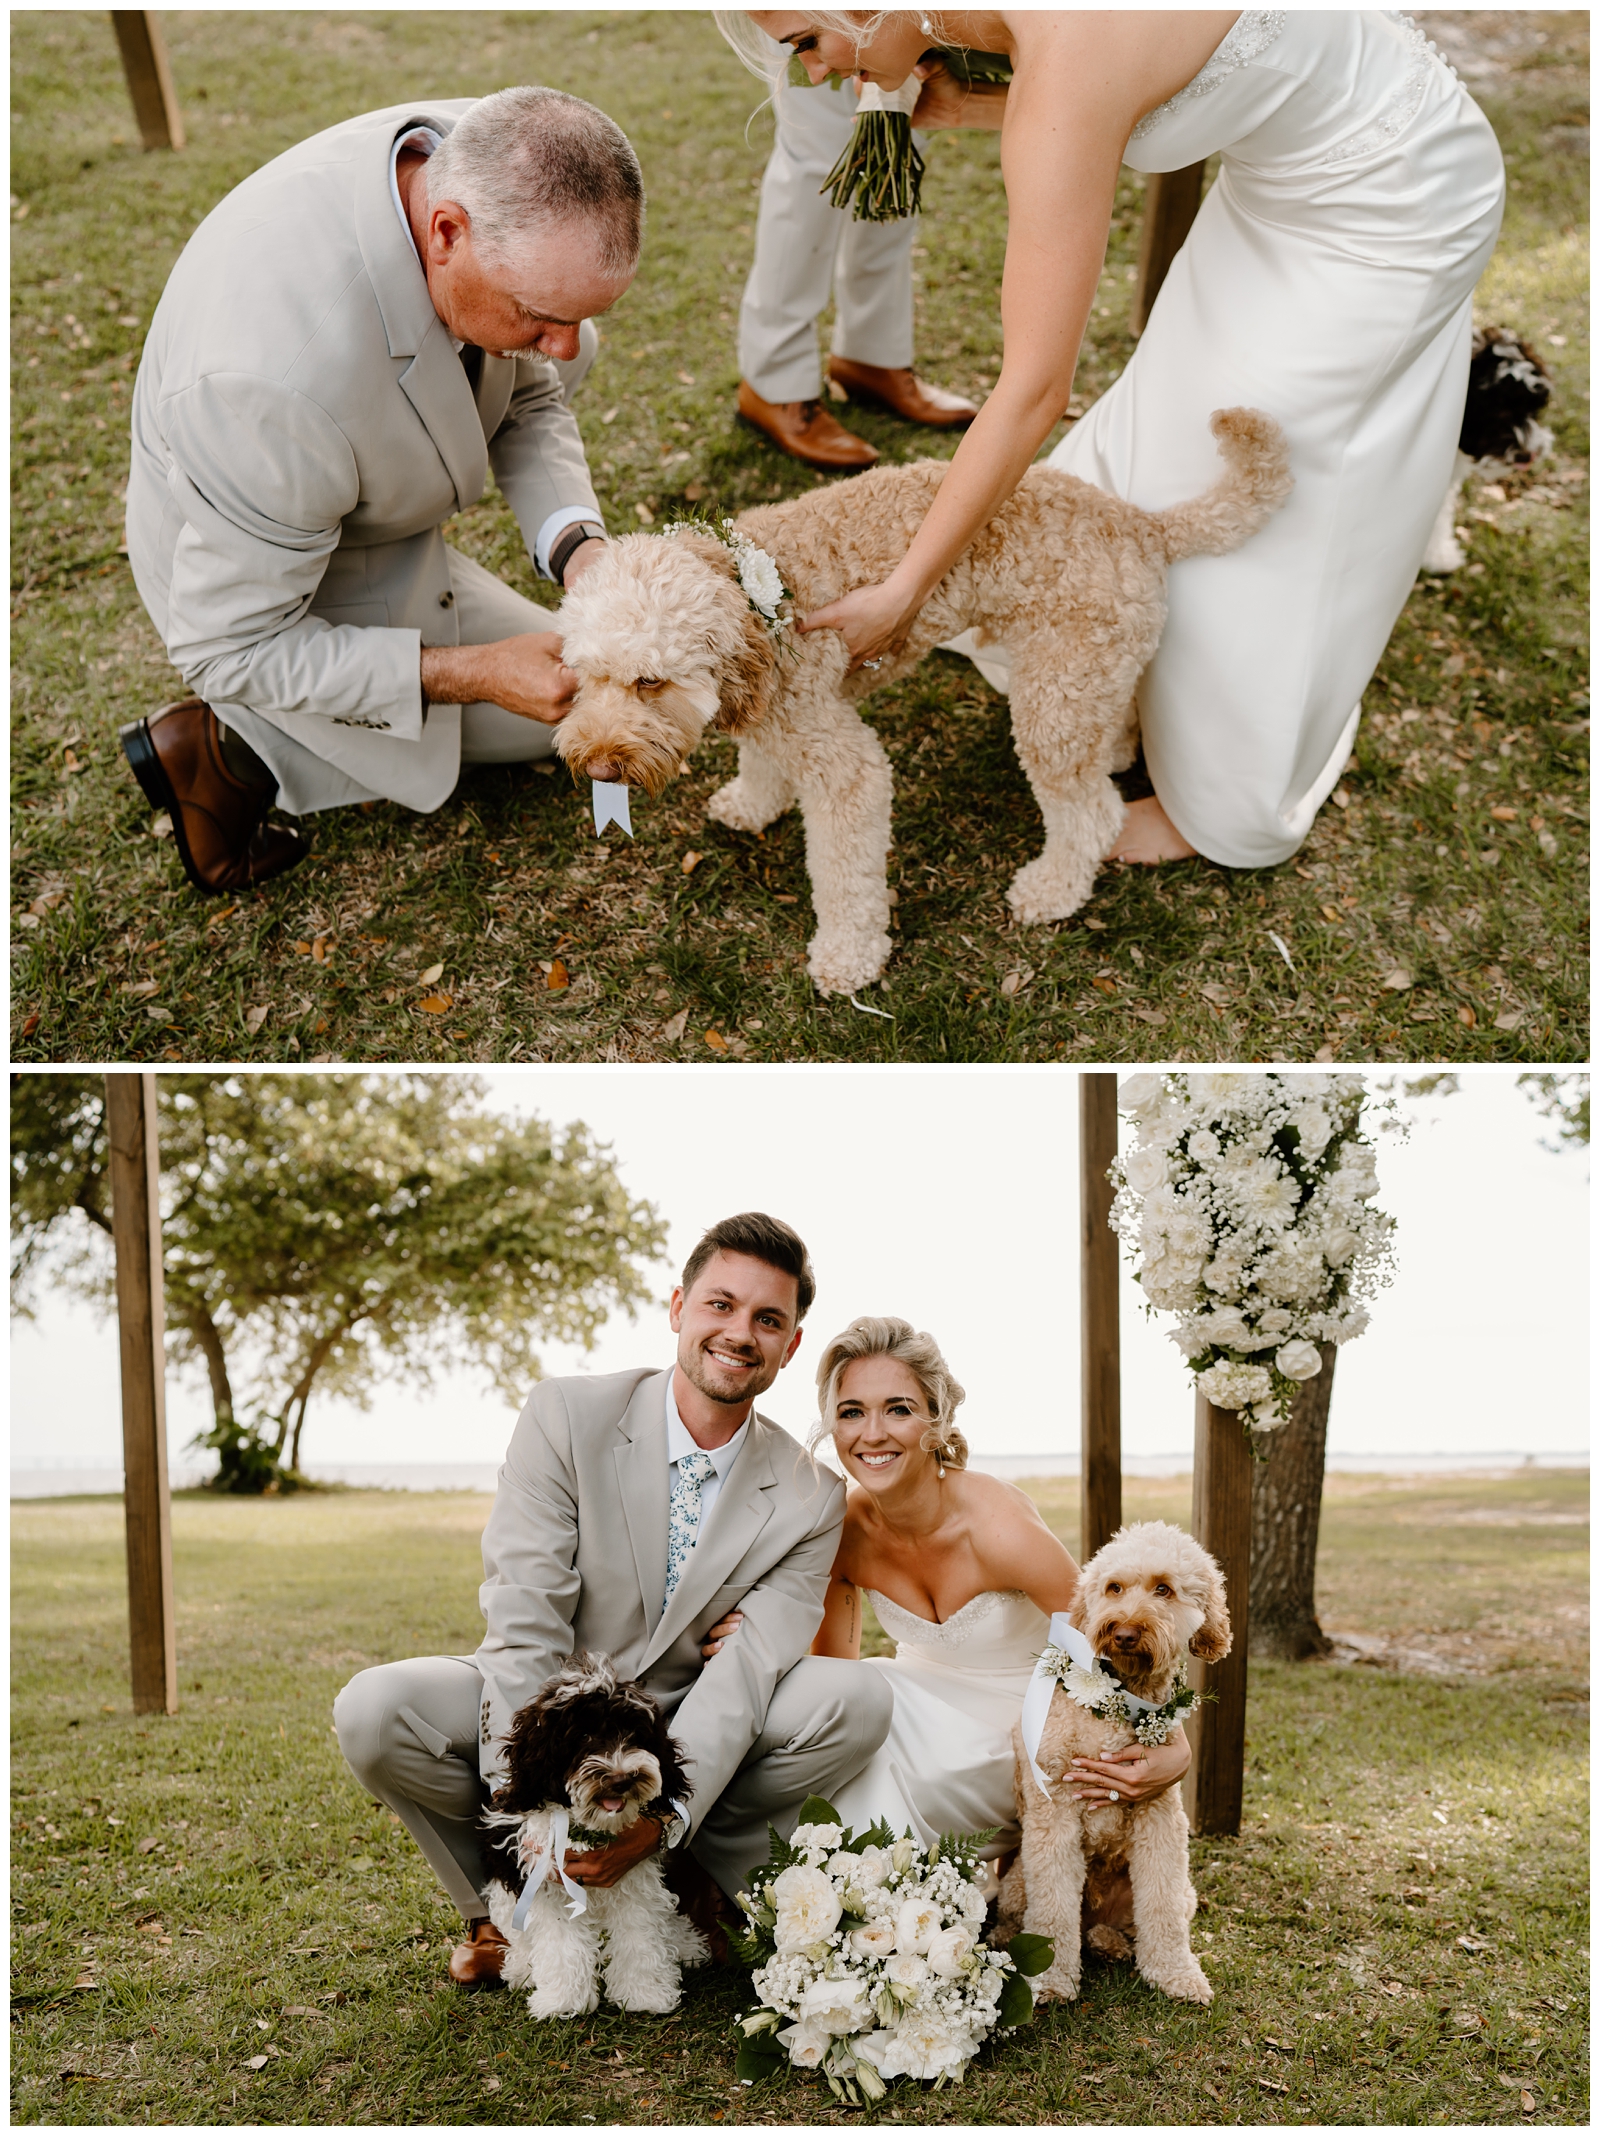 Newlyweds with their dogs on their wedding day in the Outer Banks